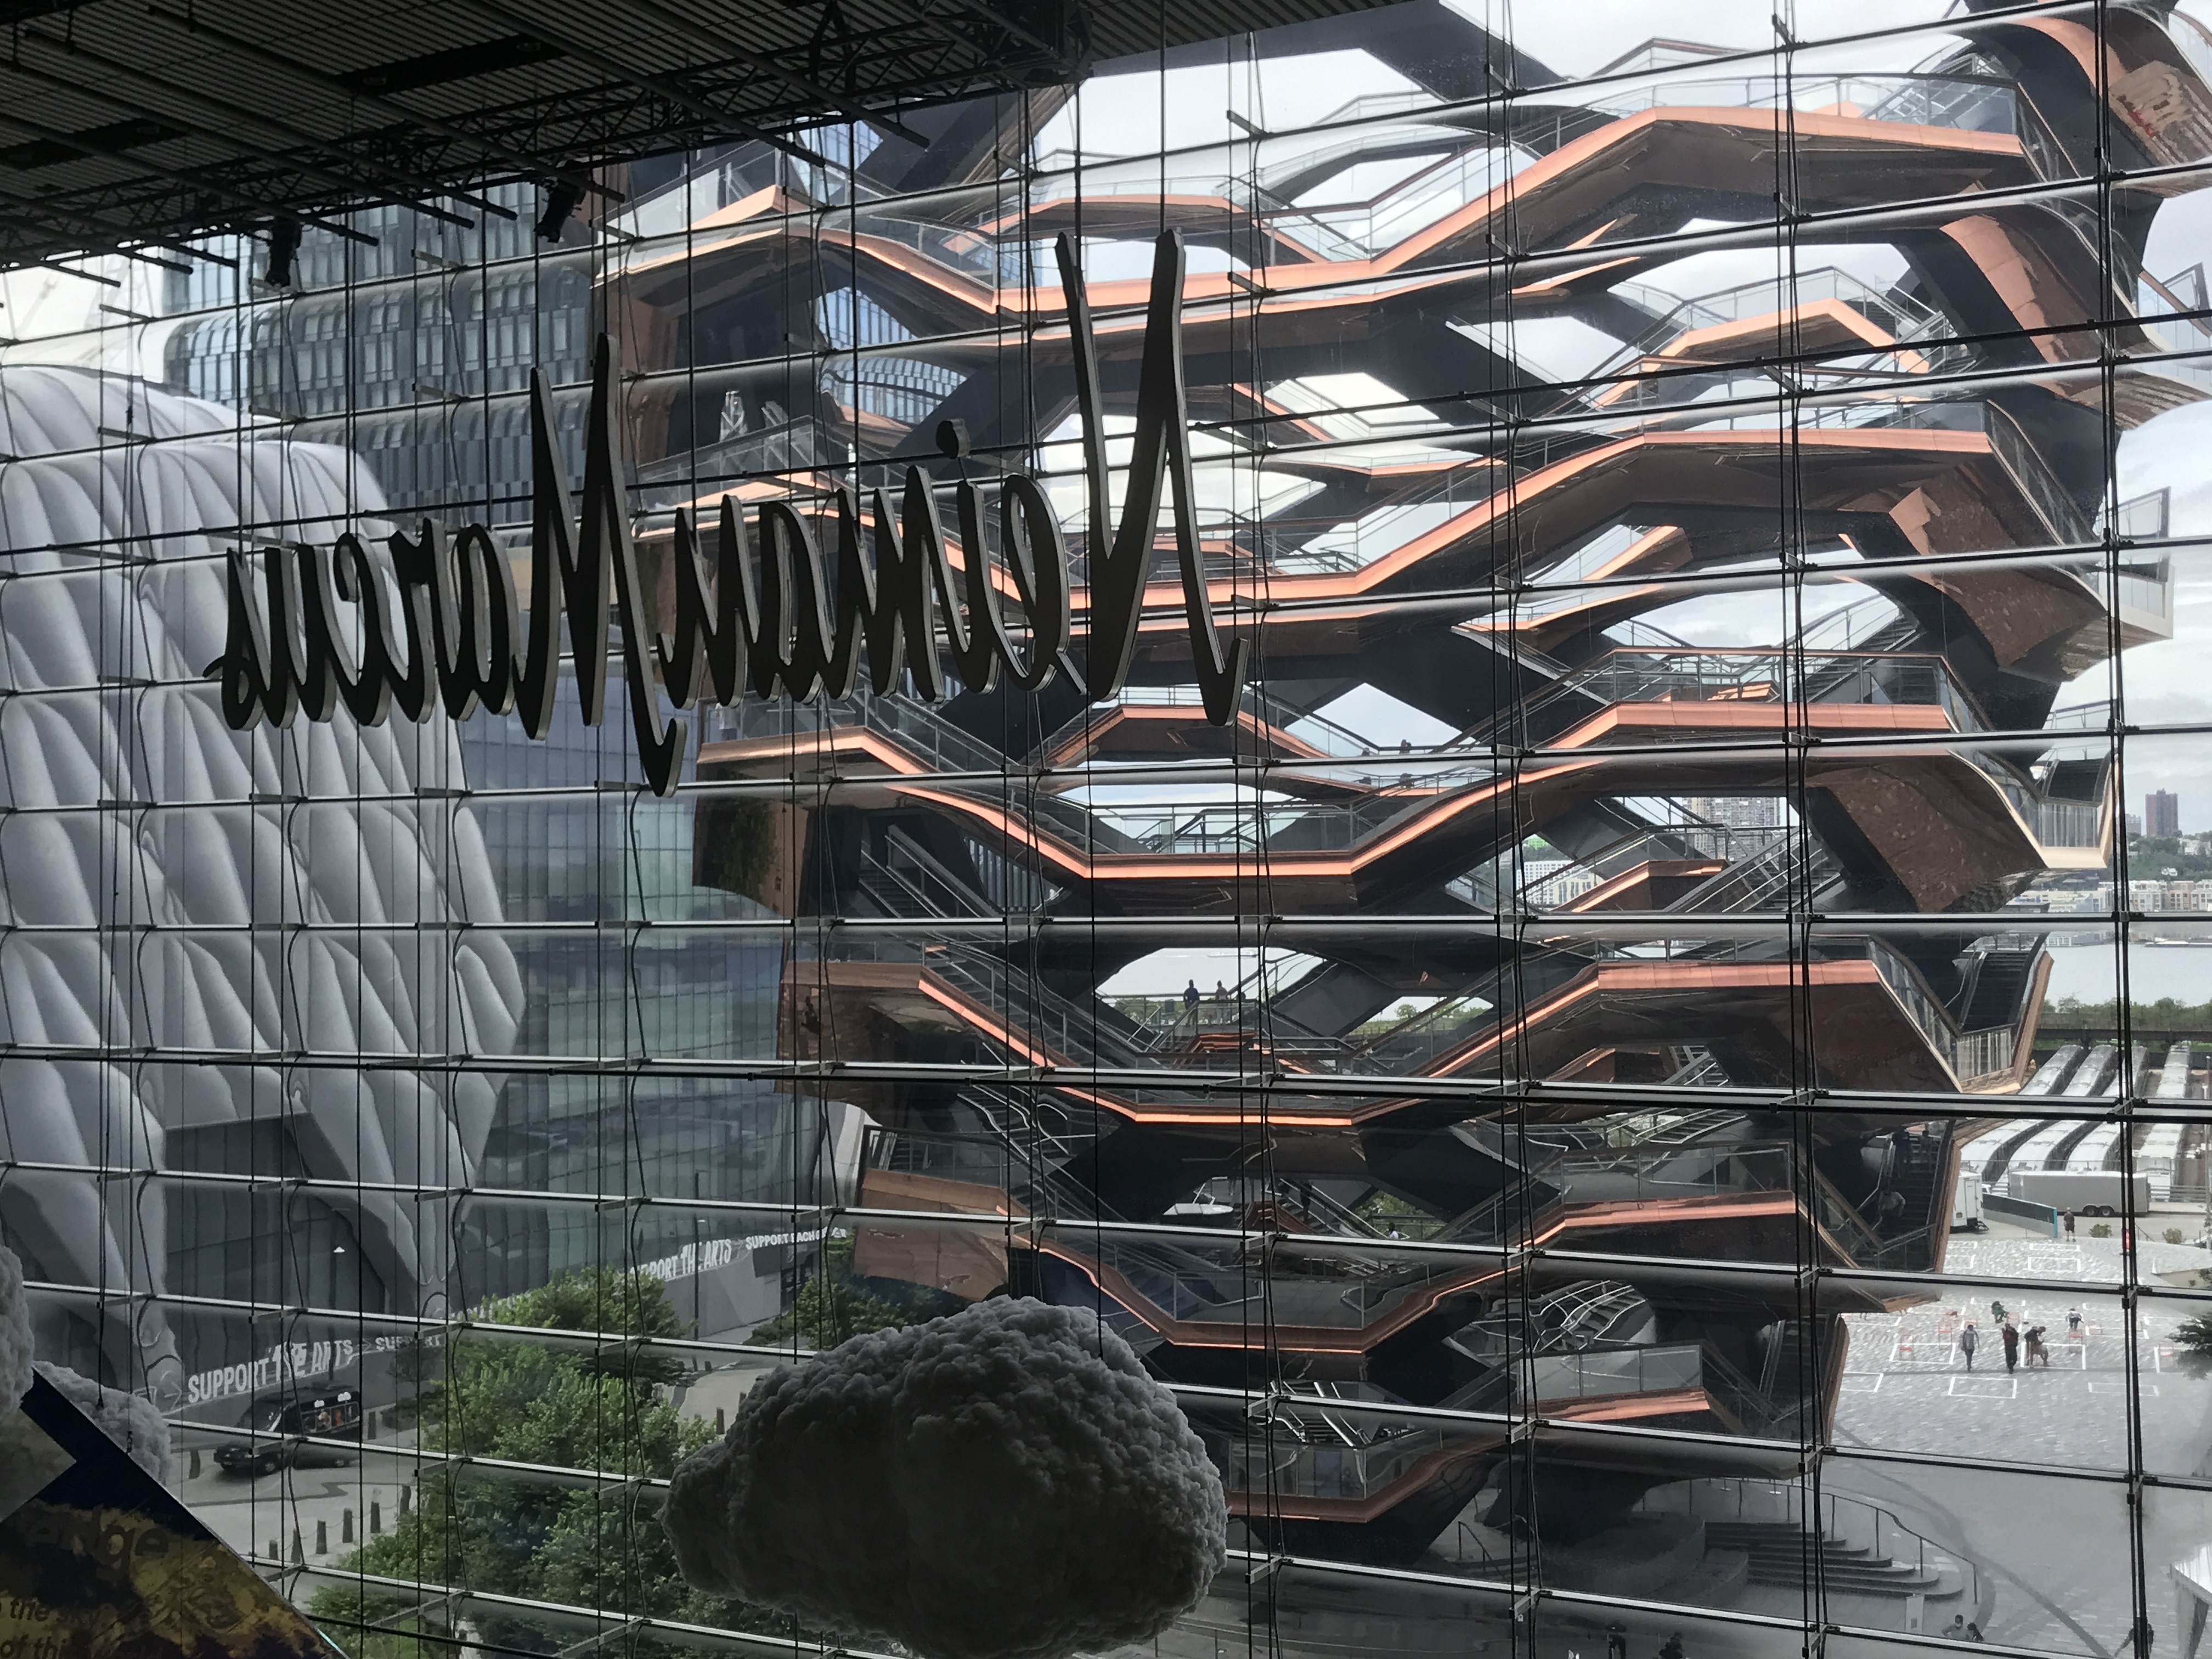 75% of the Stores in NYC's Hudson Yards Didn't Pay Rent in April